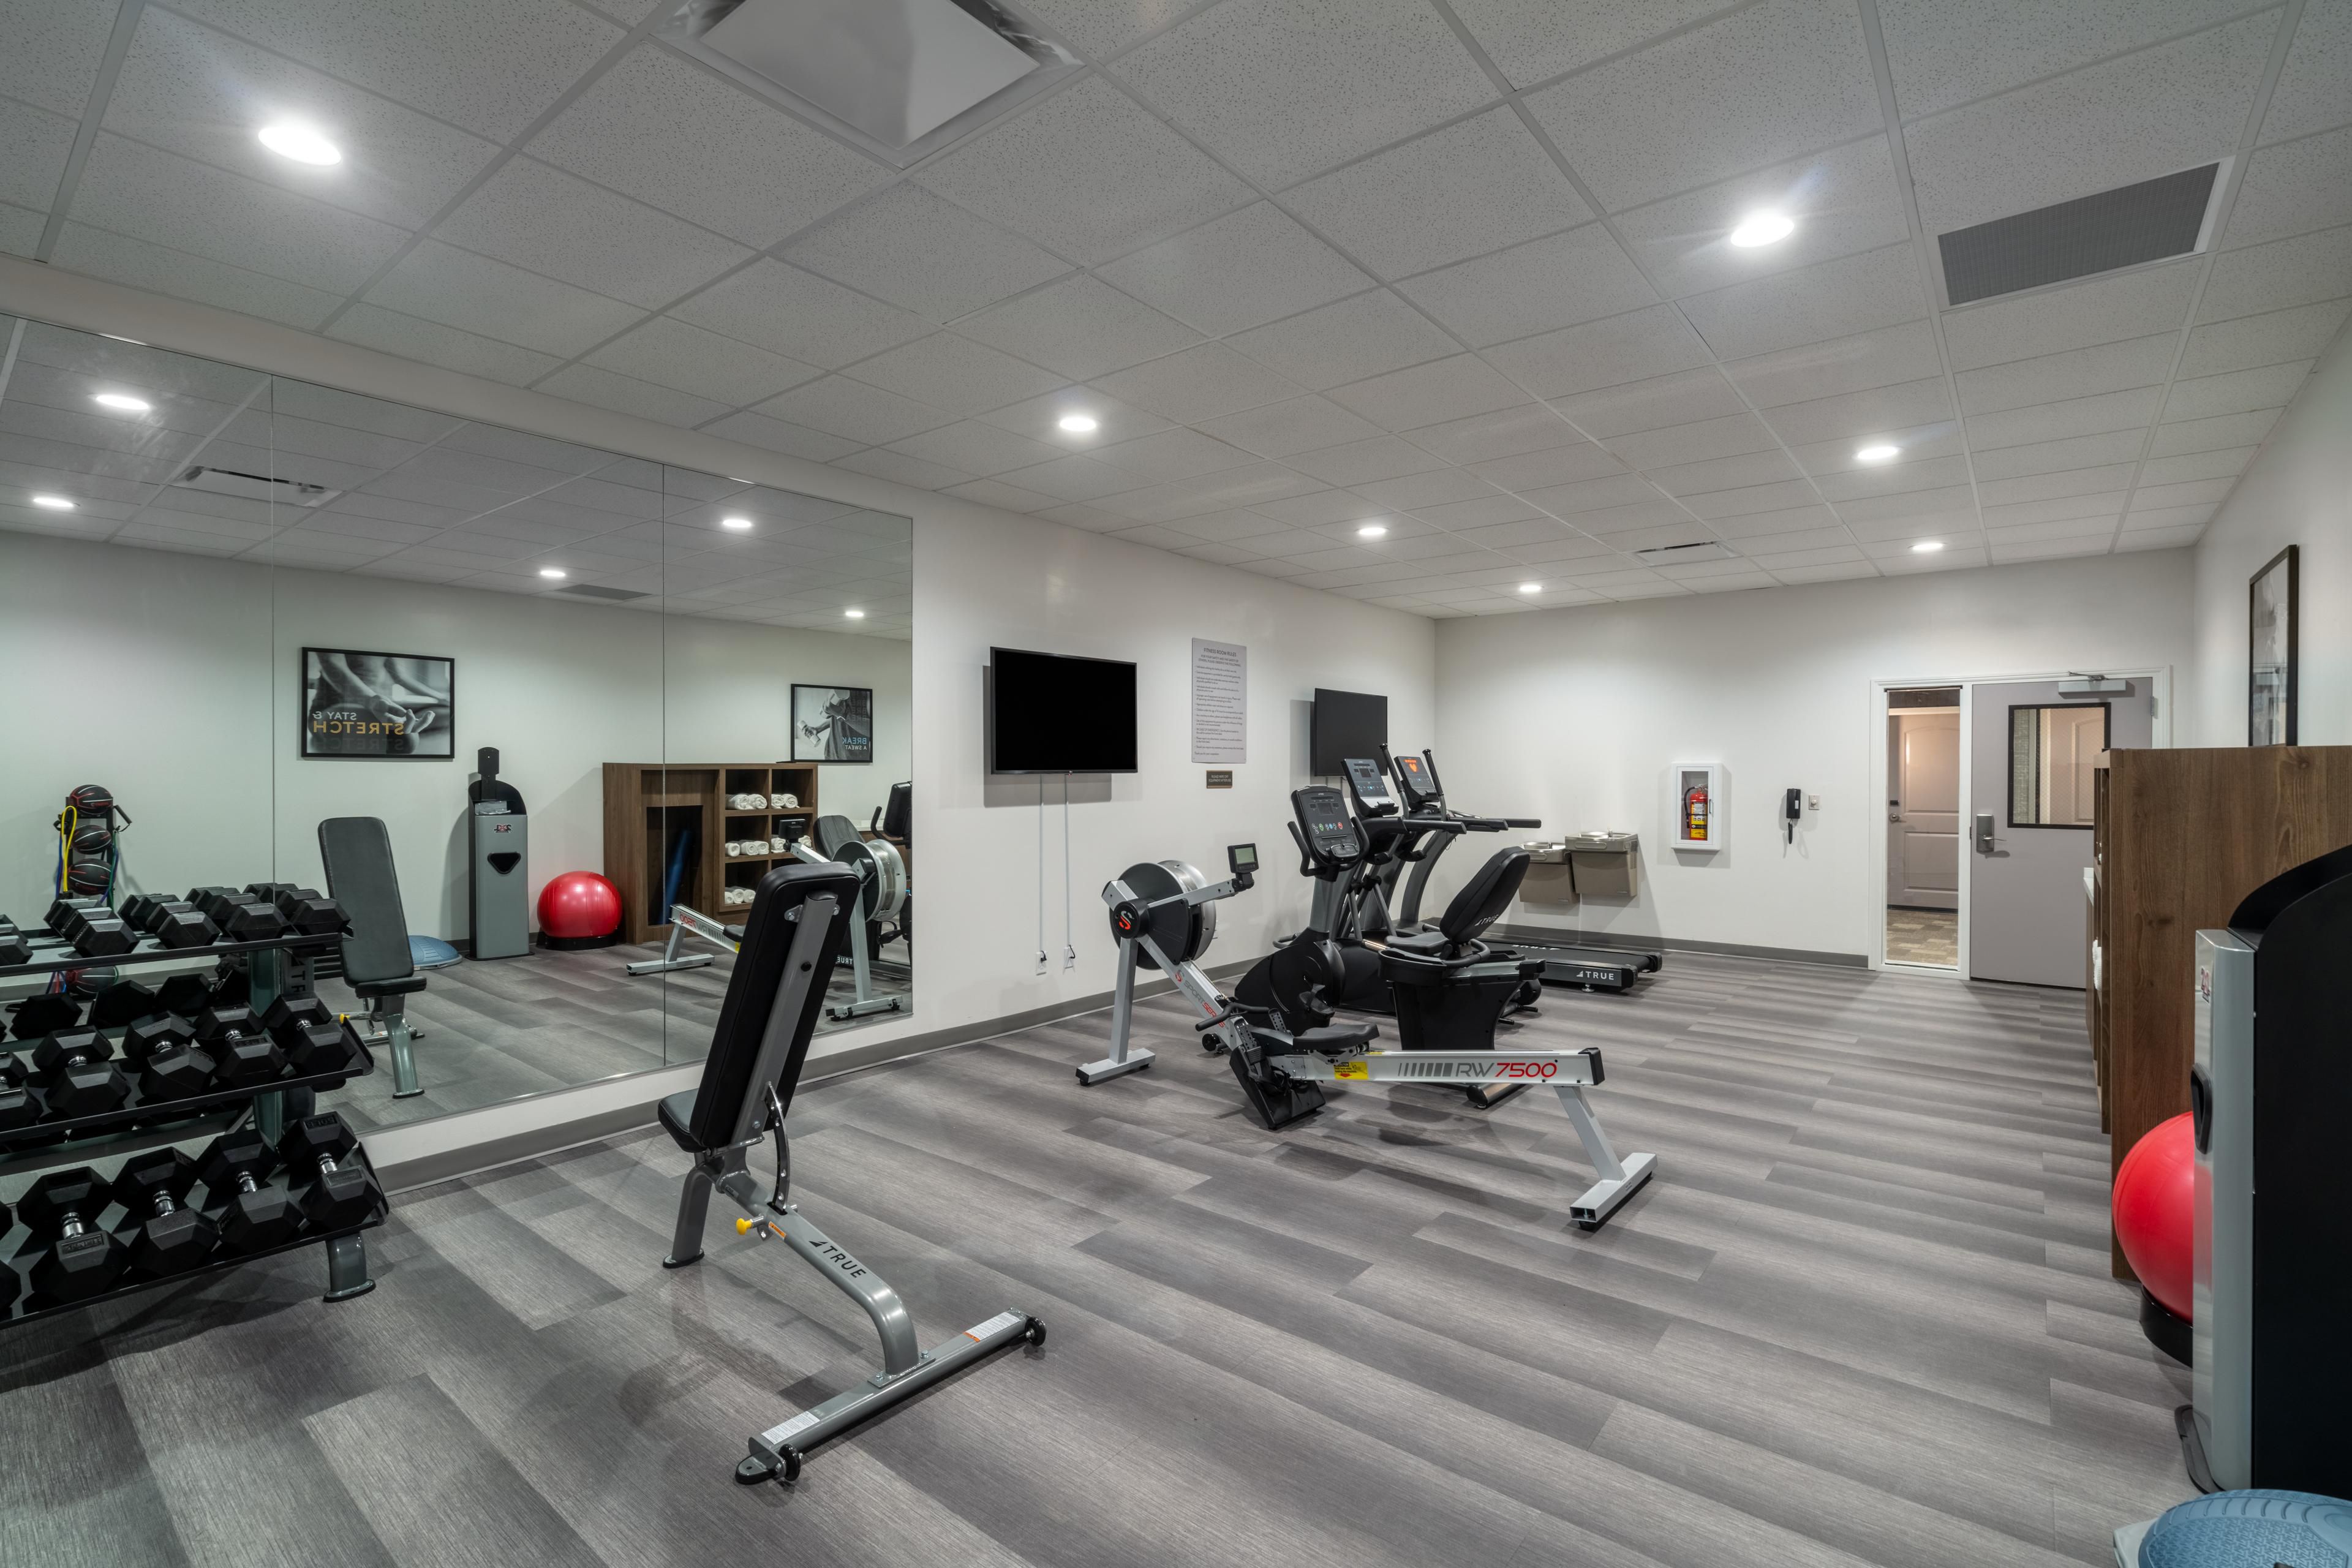 Take advantage of the hotel's fitness center and get your workout in. We have a variety of fitness equipment to keep you in shape while away from home.